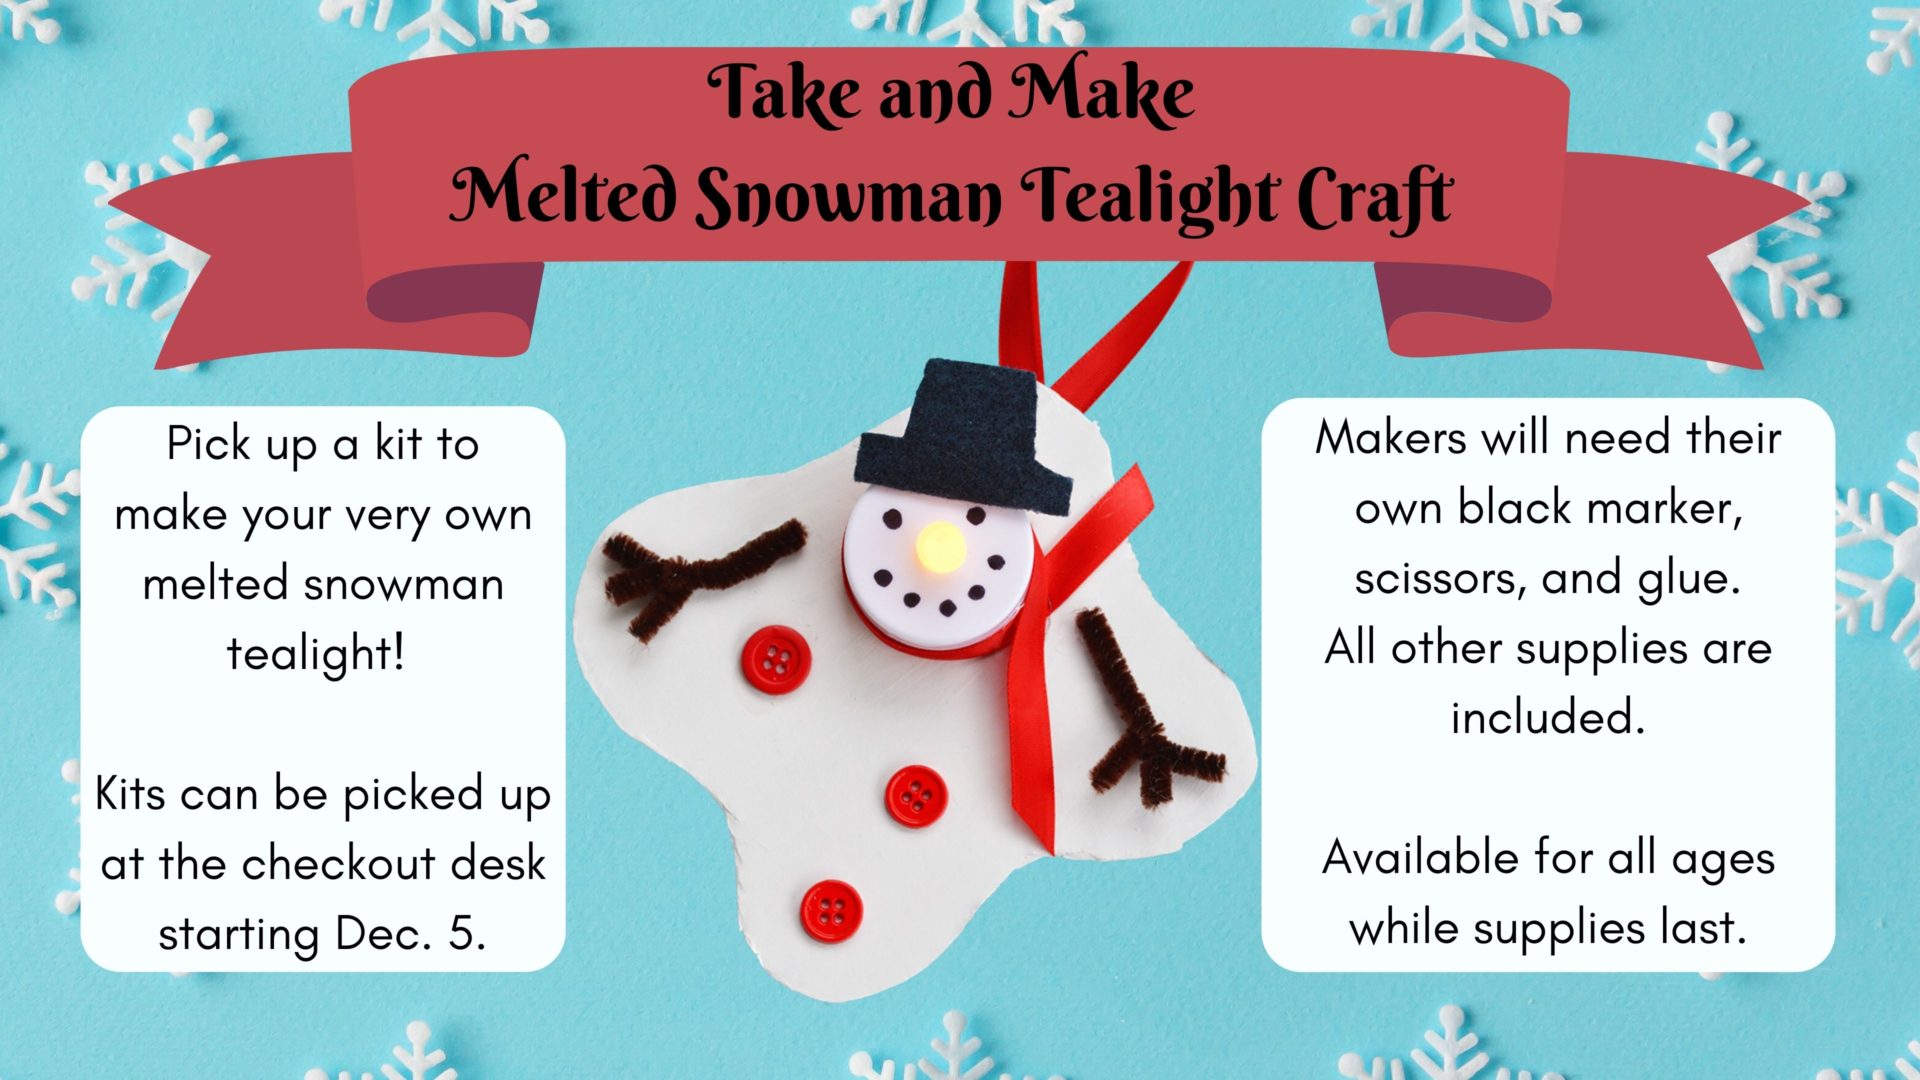 Take and Make Melted Snowman Tealight Craft